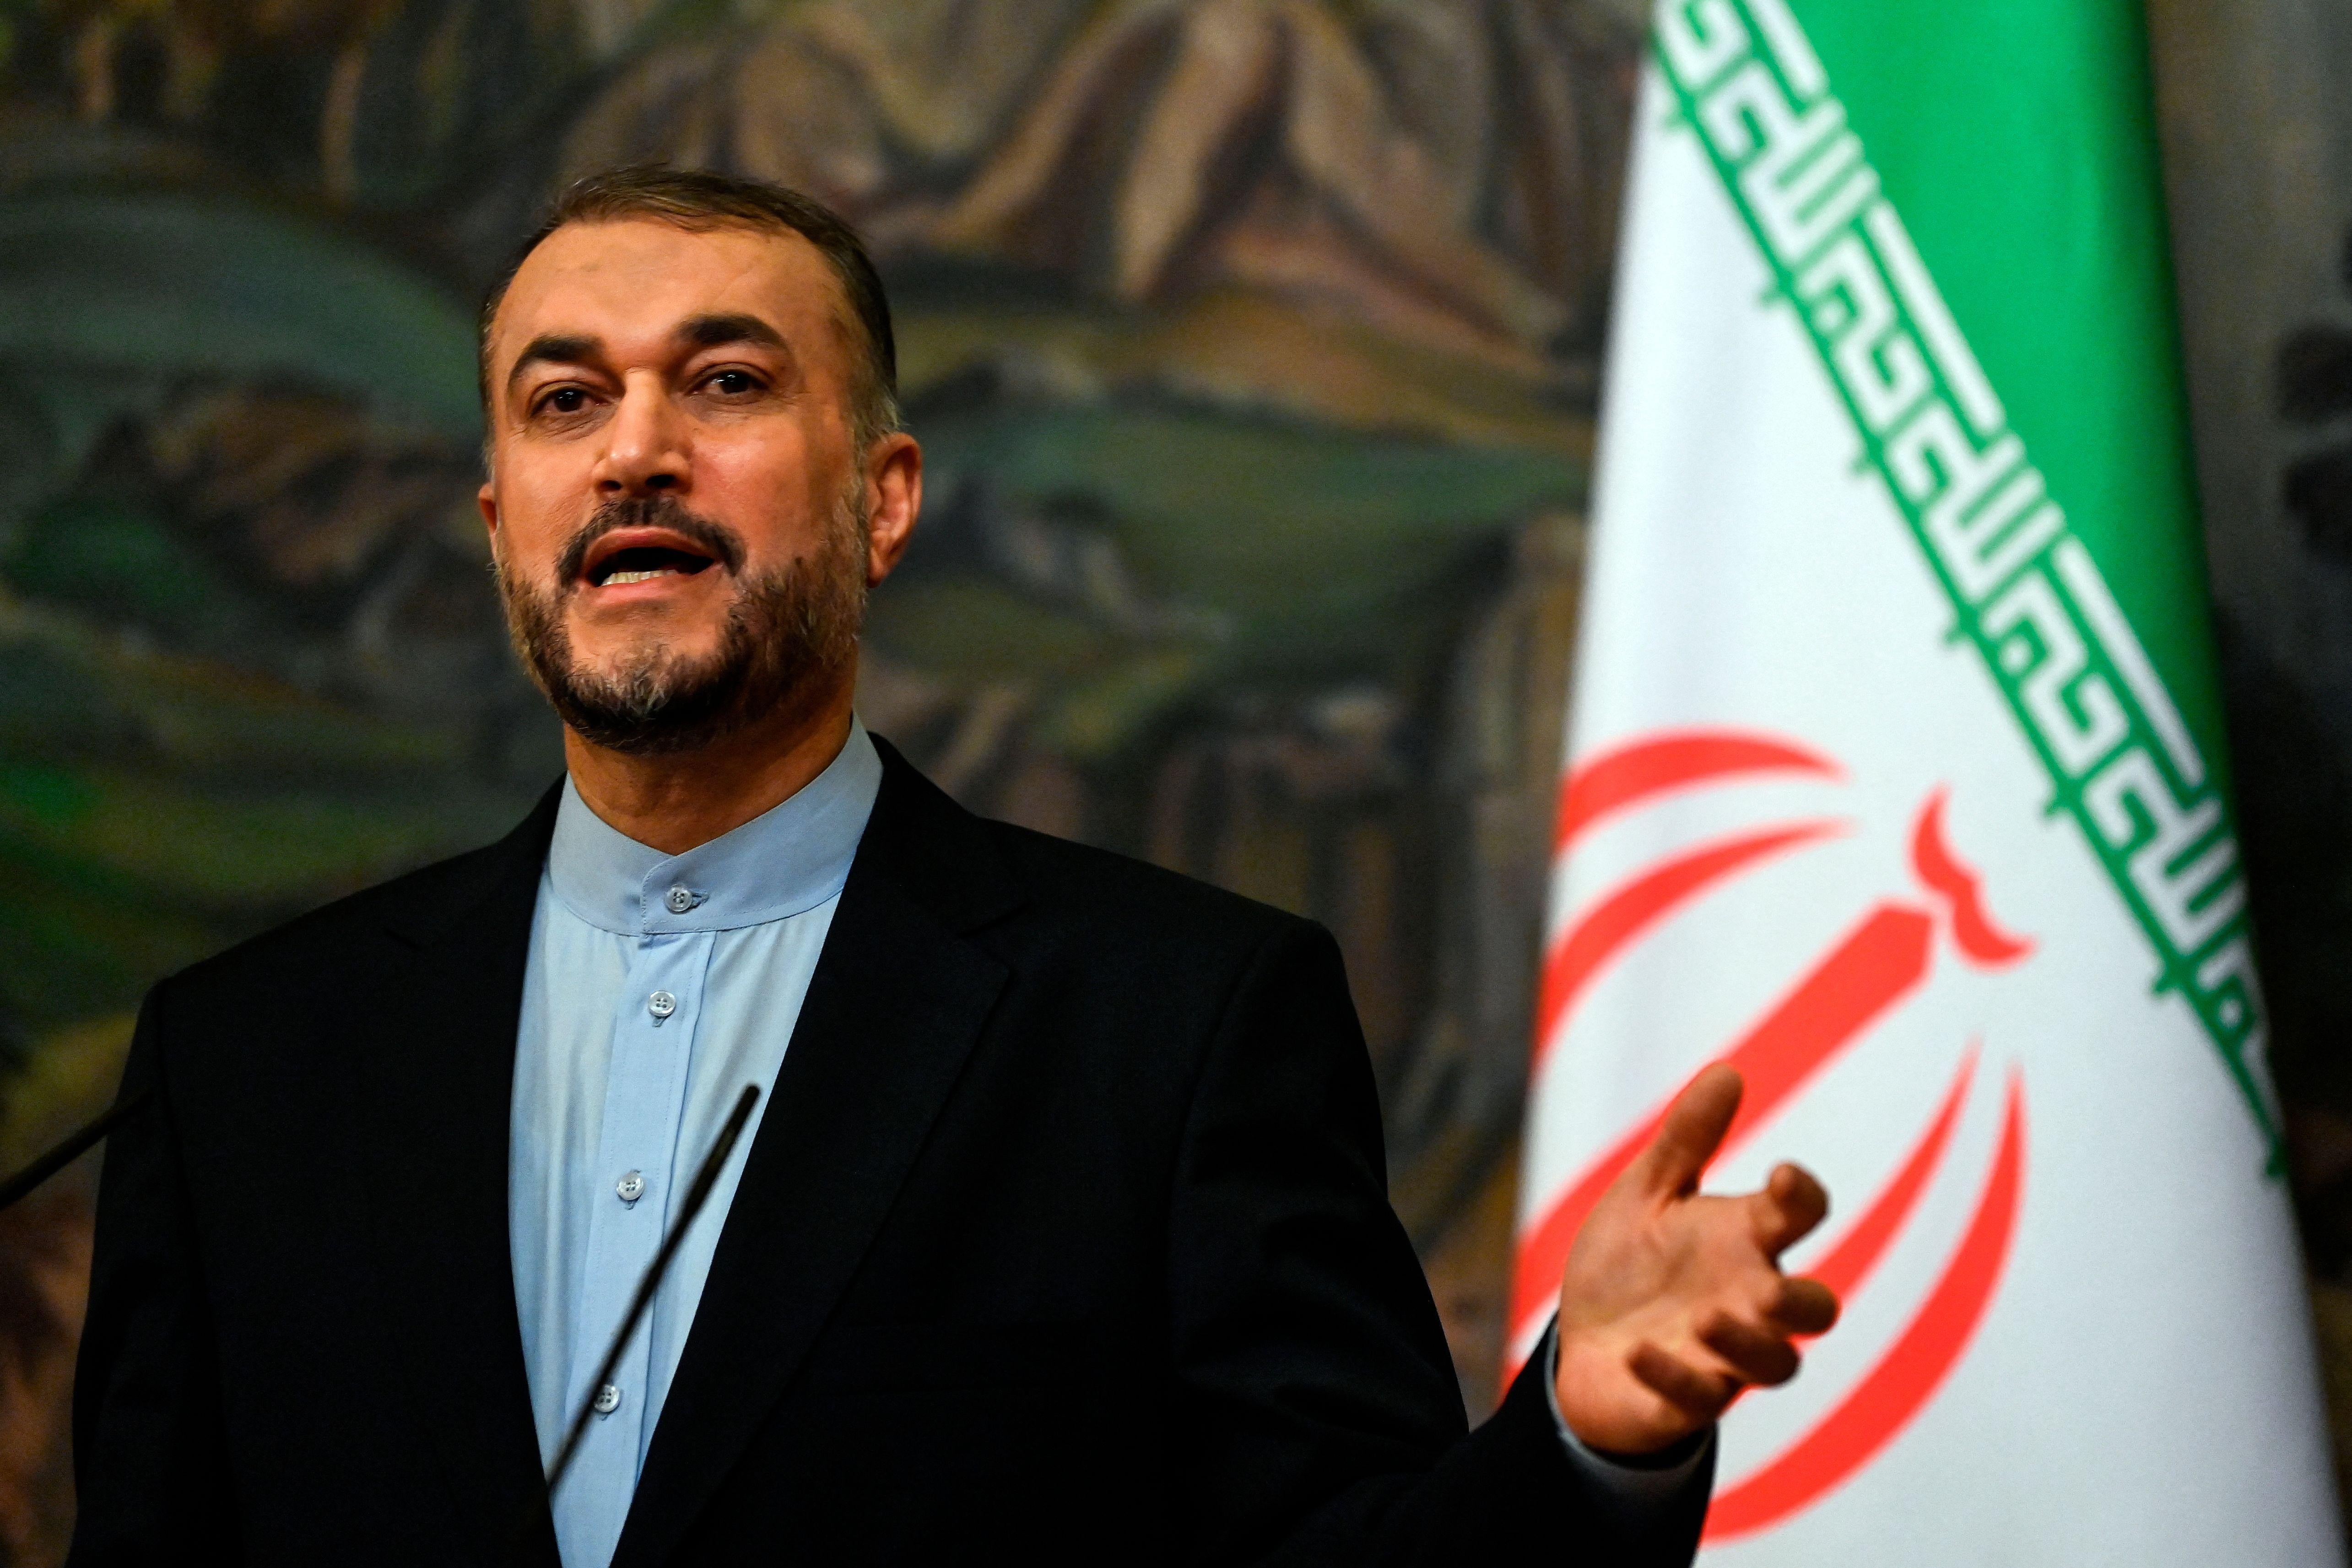 Hossein Amir-Abdollahian gestures as he speaks at a press conference with an Iranian flag behind him